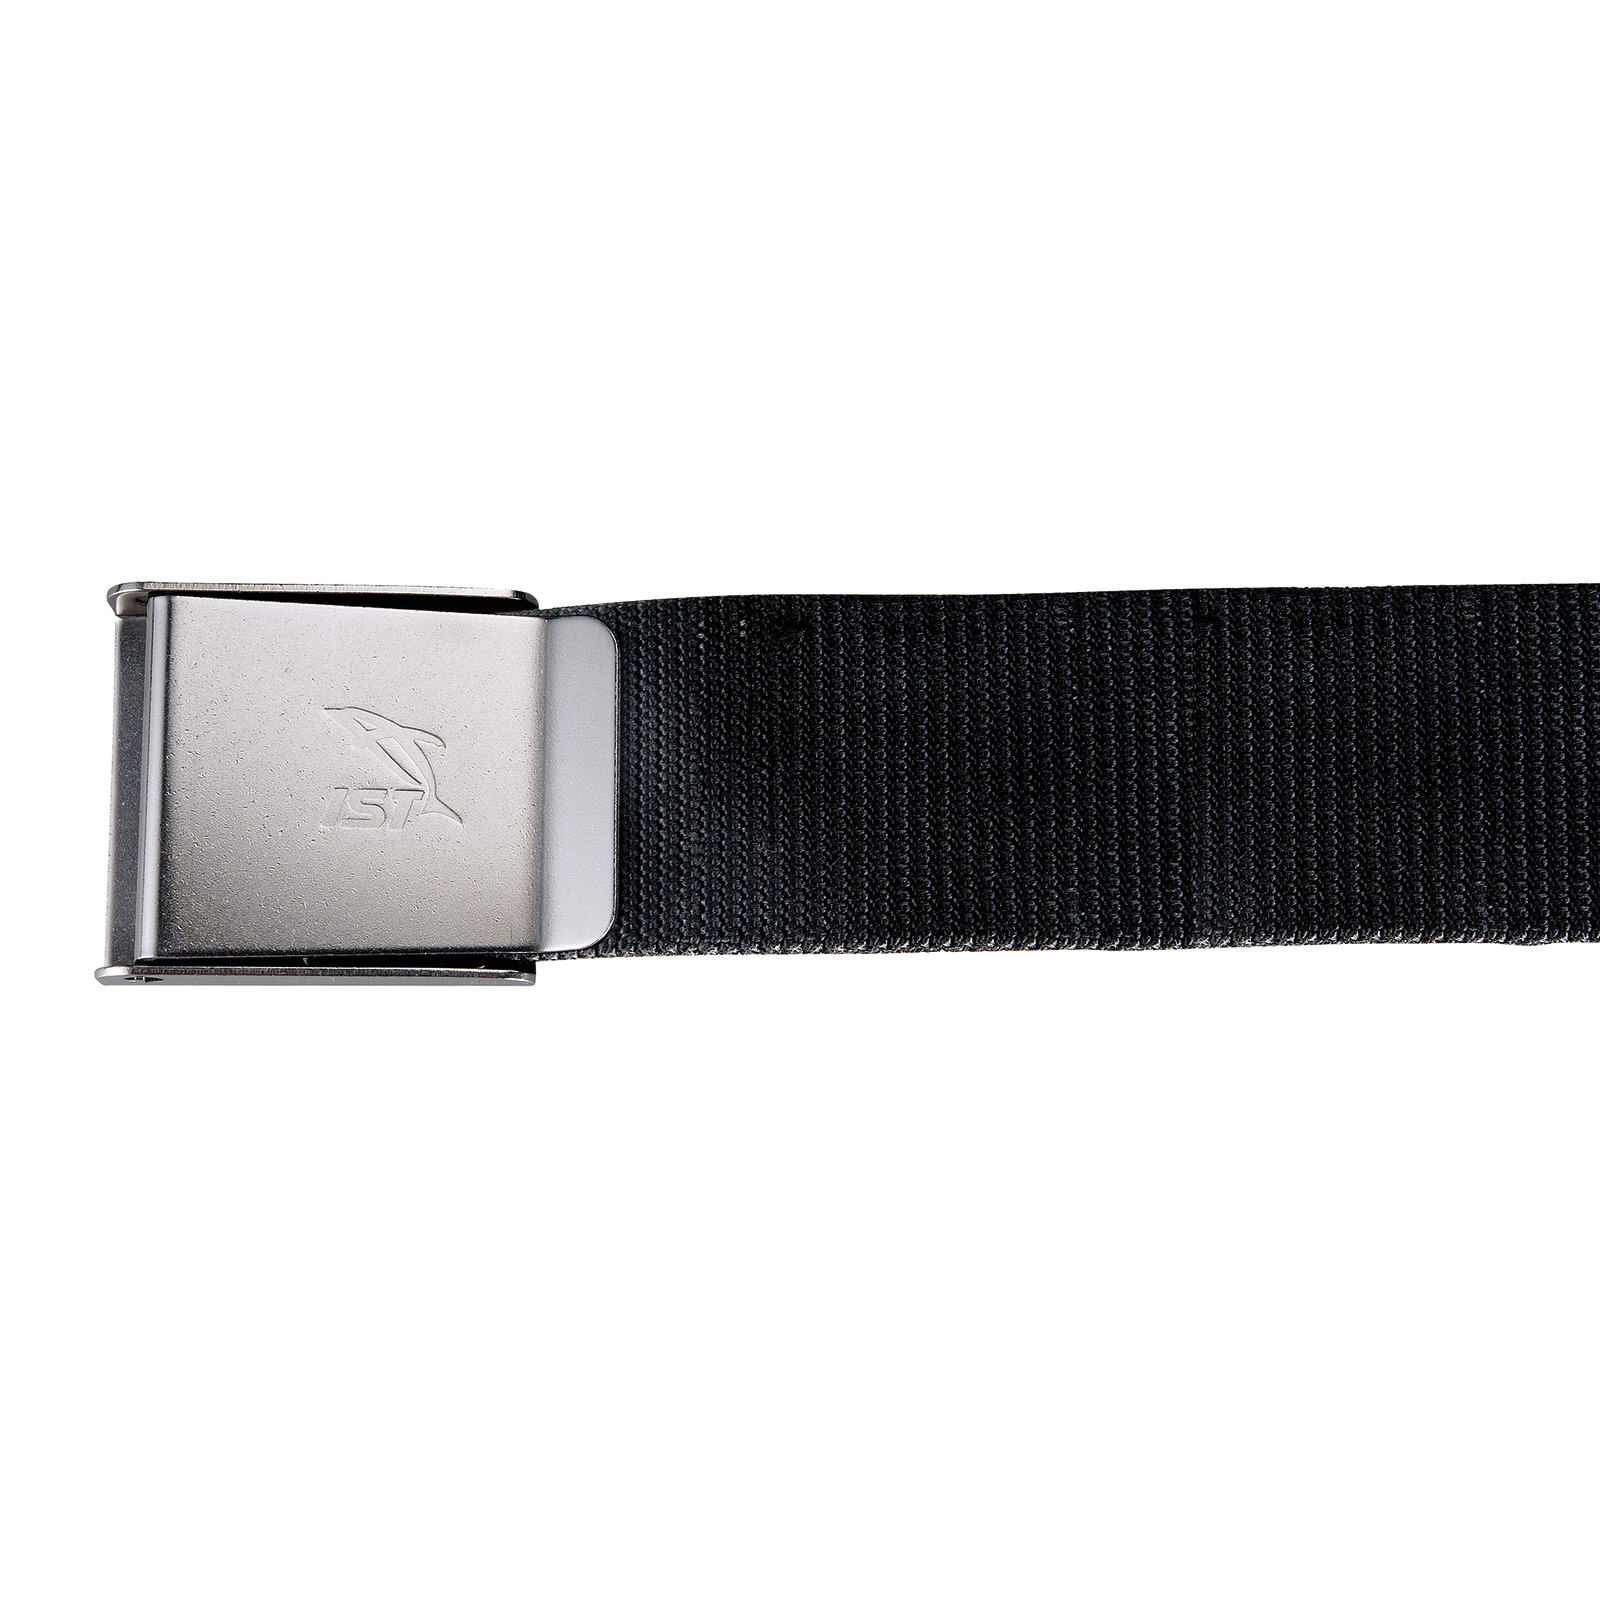 5 Foot Weight Belt with Stainless Steel Buckle